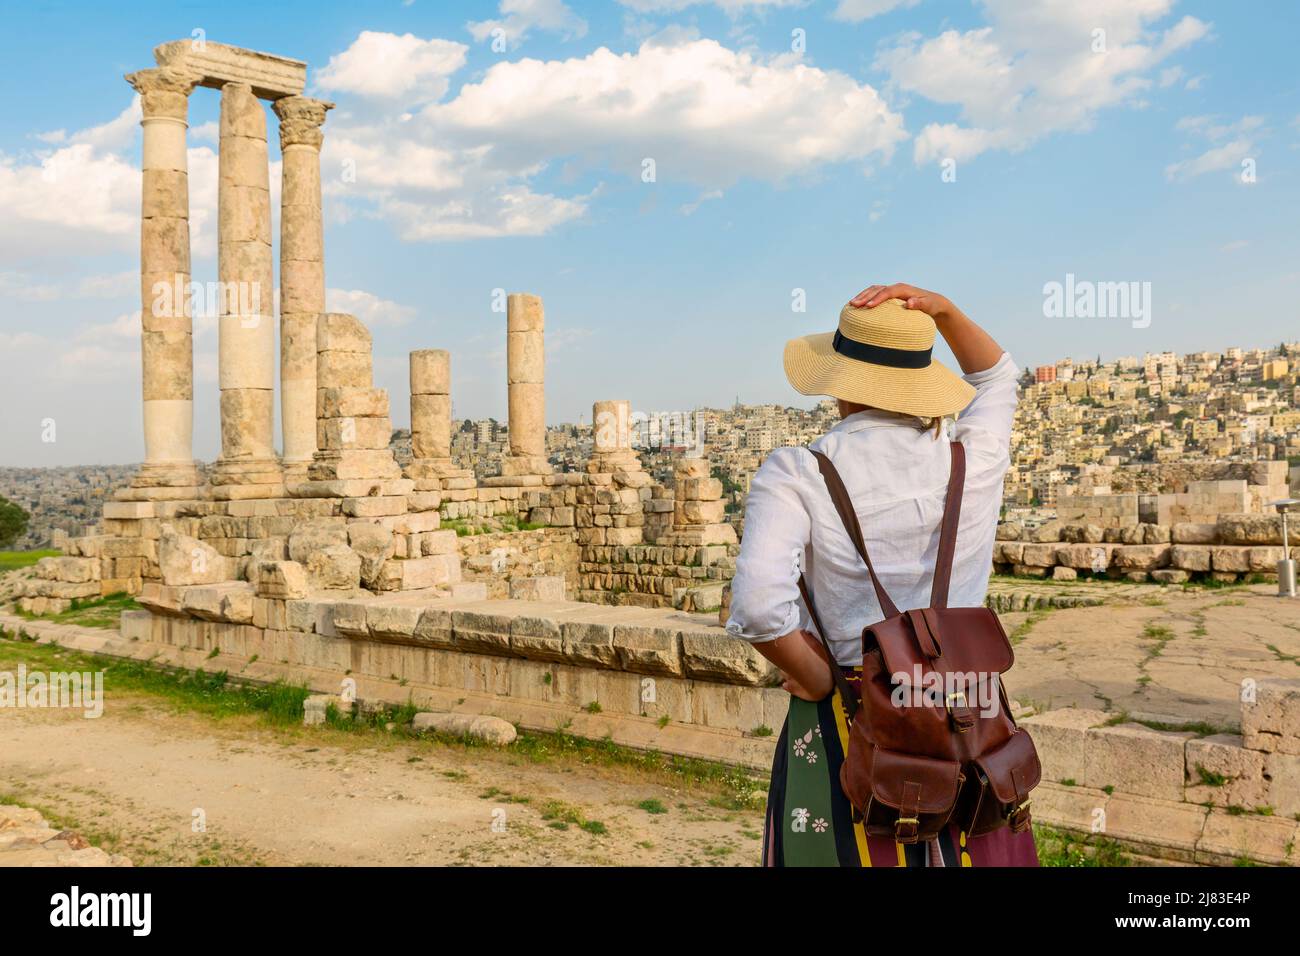 Amman, jordan. travel tourism holiday background -young girl with hat standing looking at the Temple of Hercules of the Amman Citadel complex Stock Photo